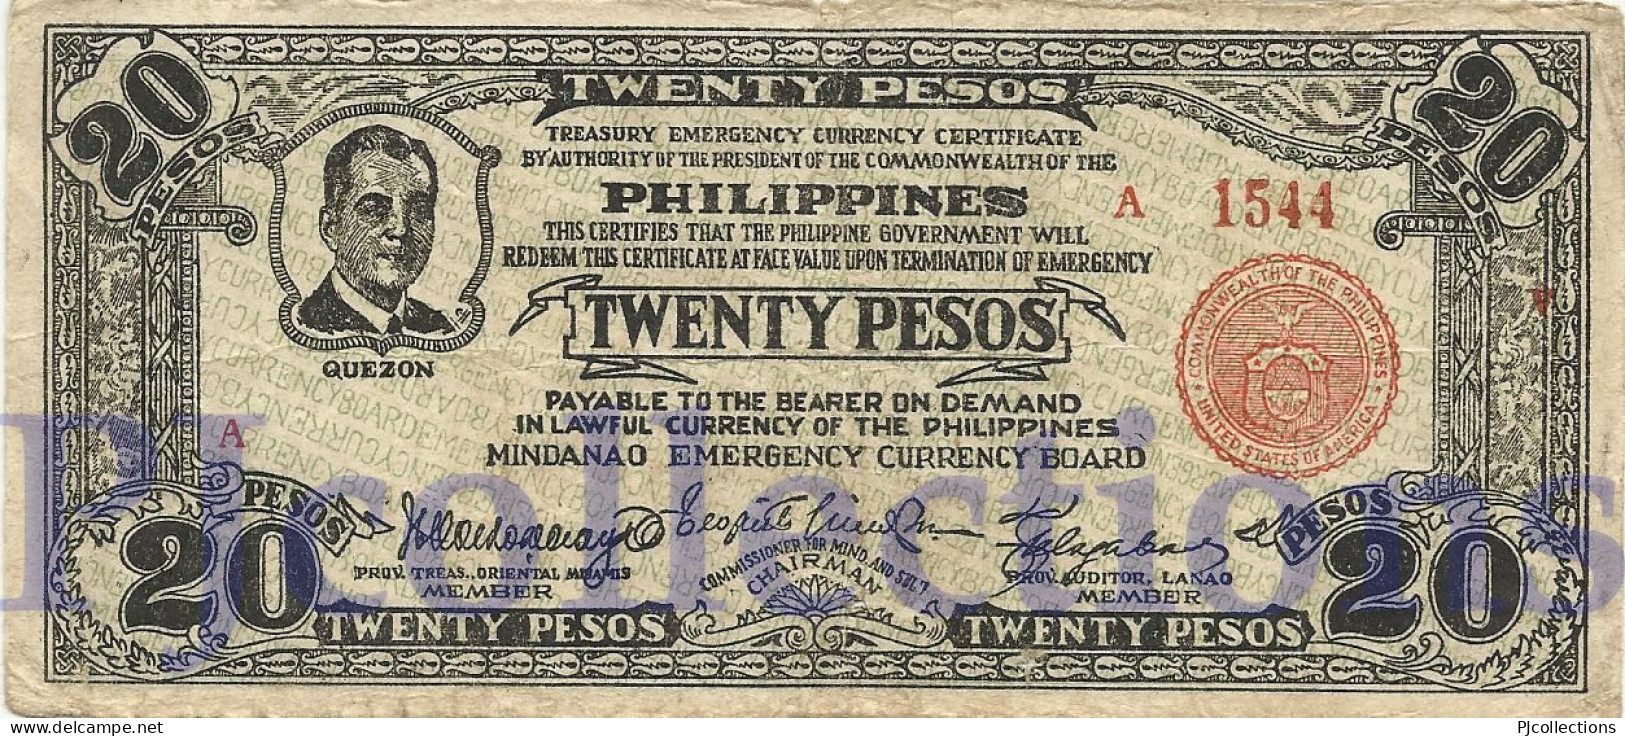 PHILIPPINES 20 PESOS 1942 PICK S474 VF RARE LOW SERIAL NUMBER "A 1544" - Philippinen